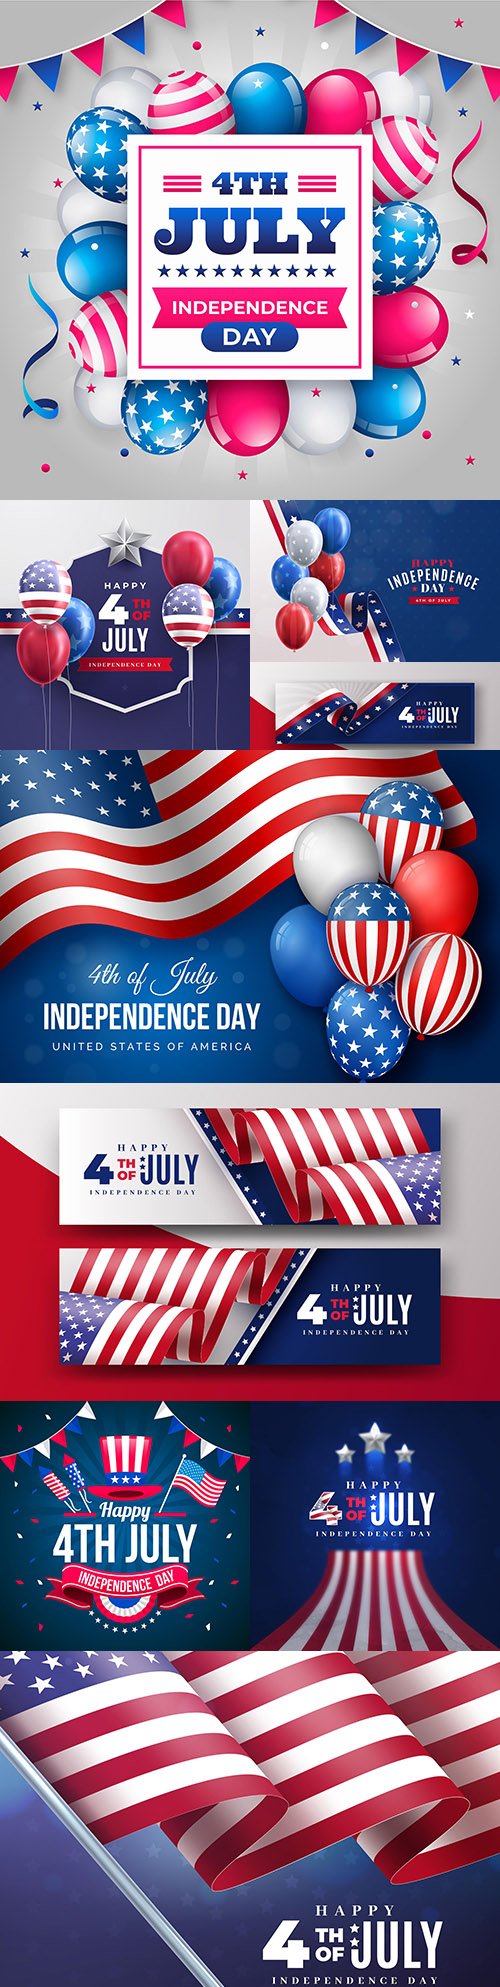 July 4 on Independence Day realistic illustrations